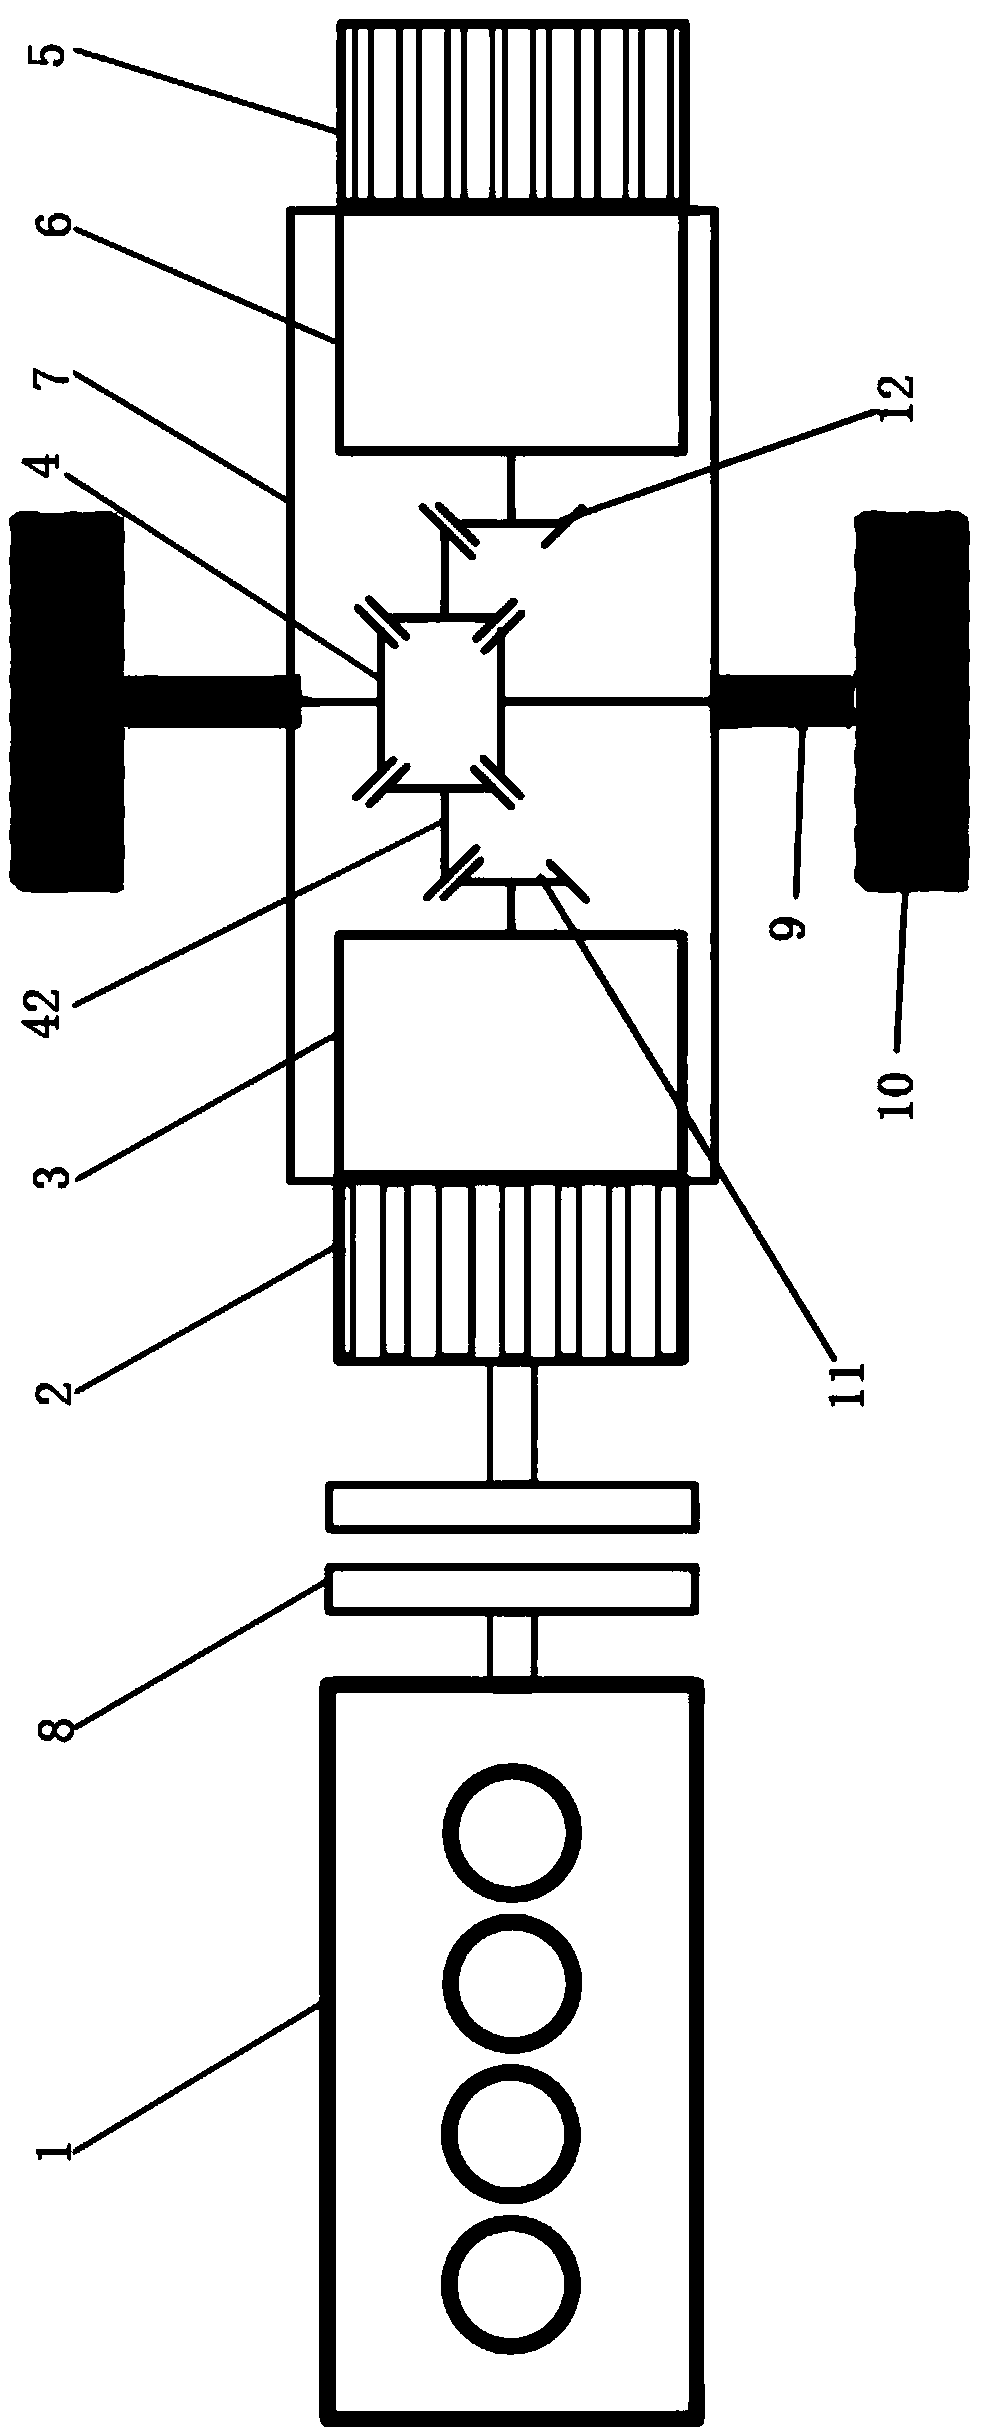 Hybrid power coupled axle based on two gearboxes